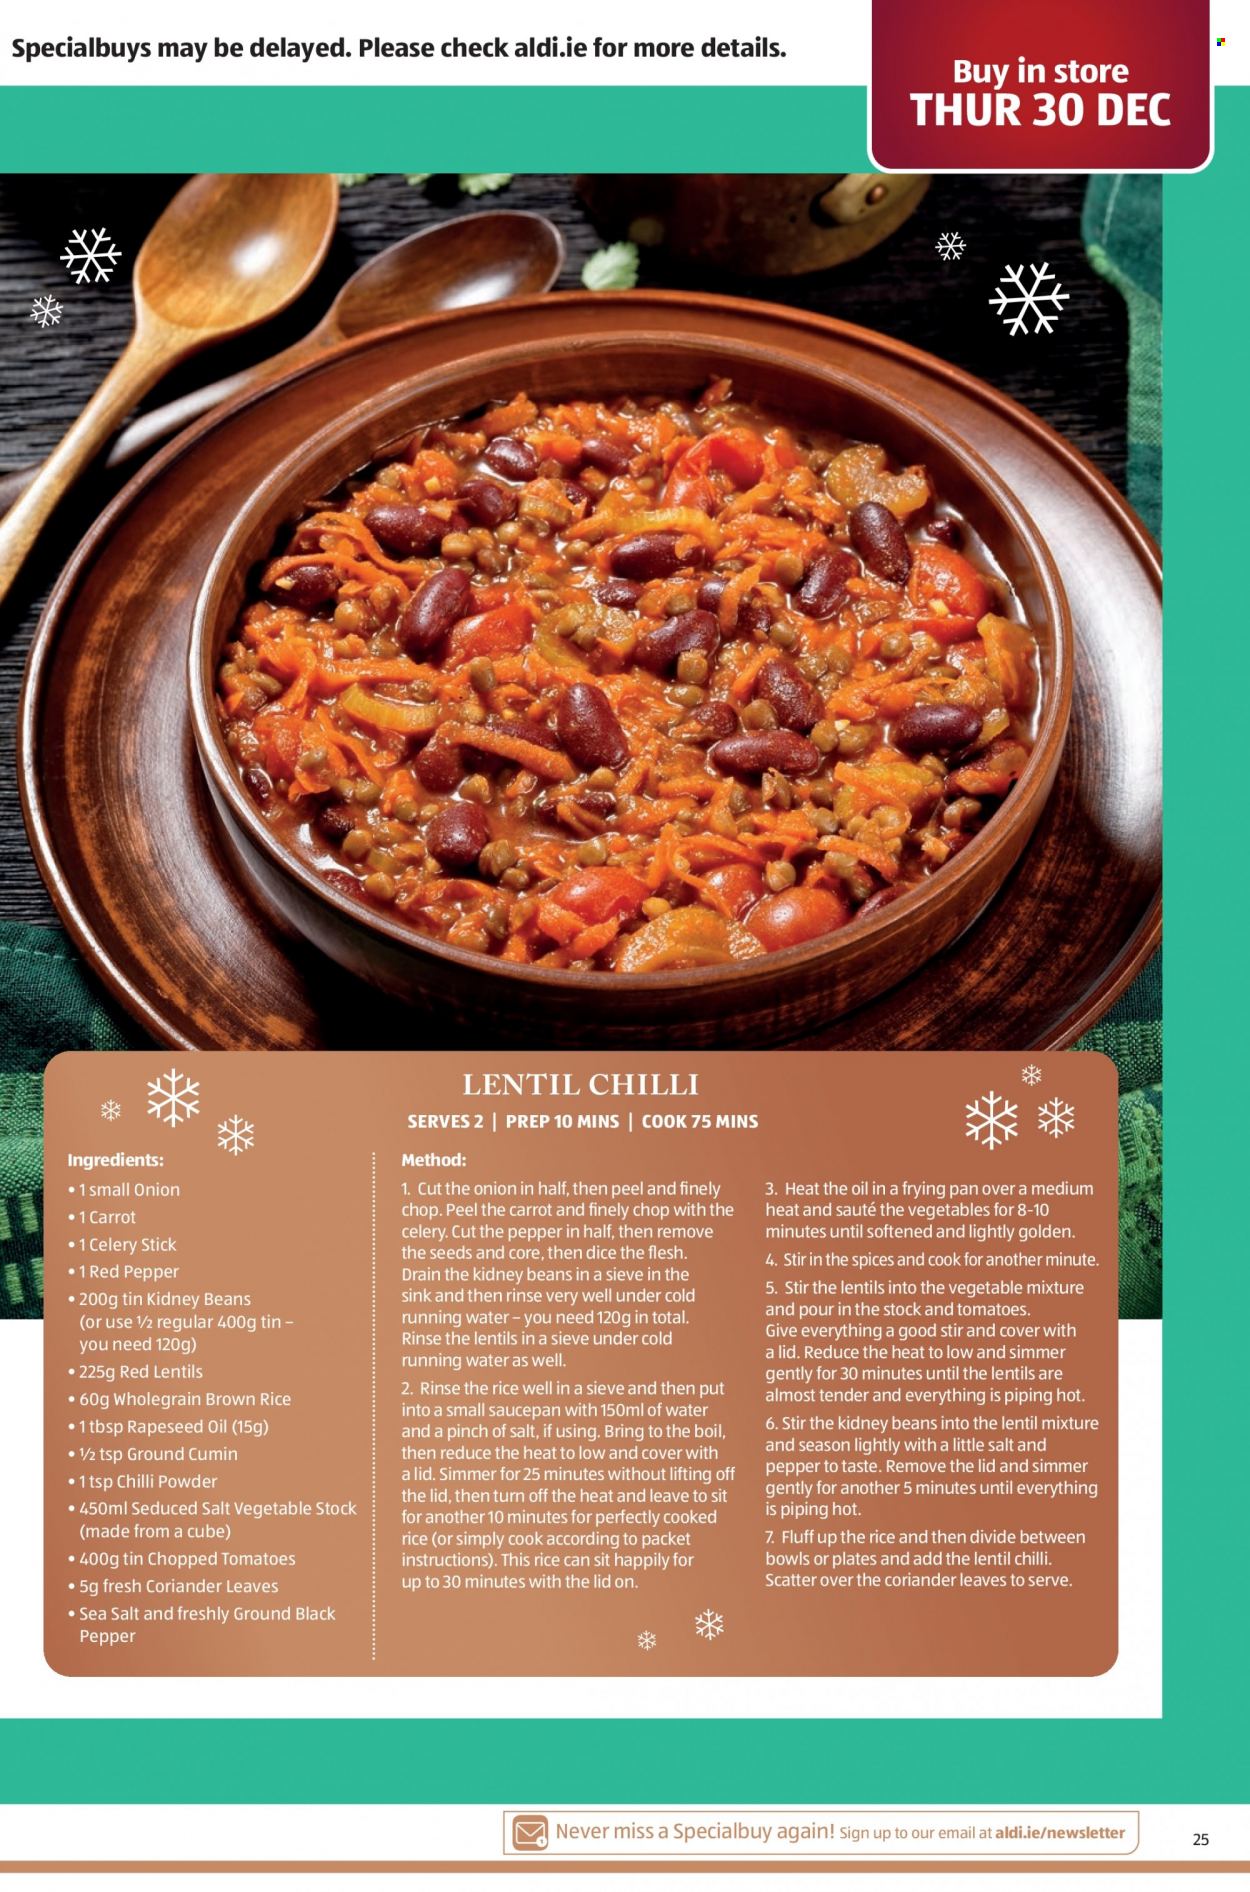 thumbnail - Aldi offer  - 27.12.2021 - 05.01.2022 - Sales products - vegetable stock, sea salt, lentils, kidney beans, chopped tomatoes, brown rice, rice, red lentils, cumin, coriander, chilli powder, lid, plate, pan, saucepan. Page 25.